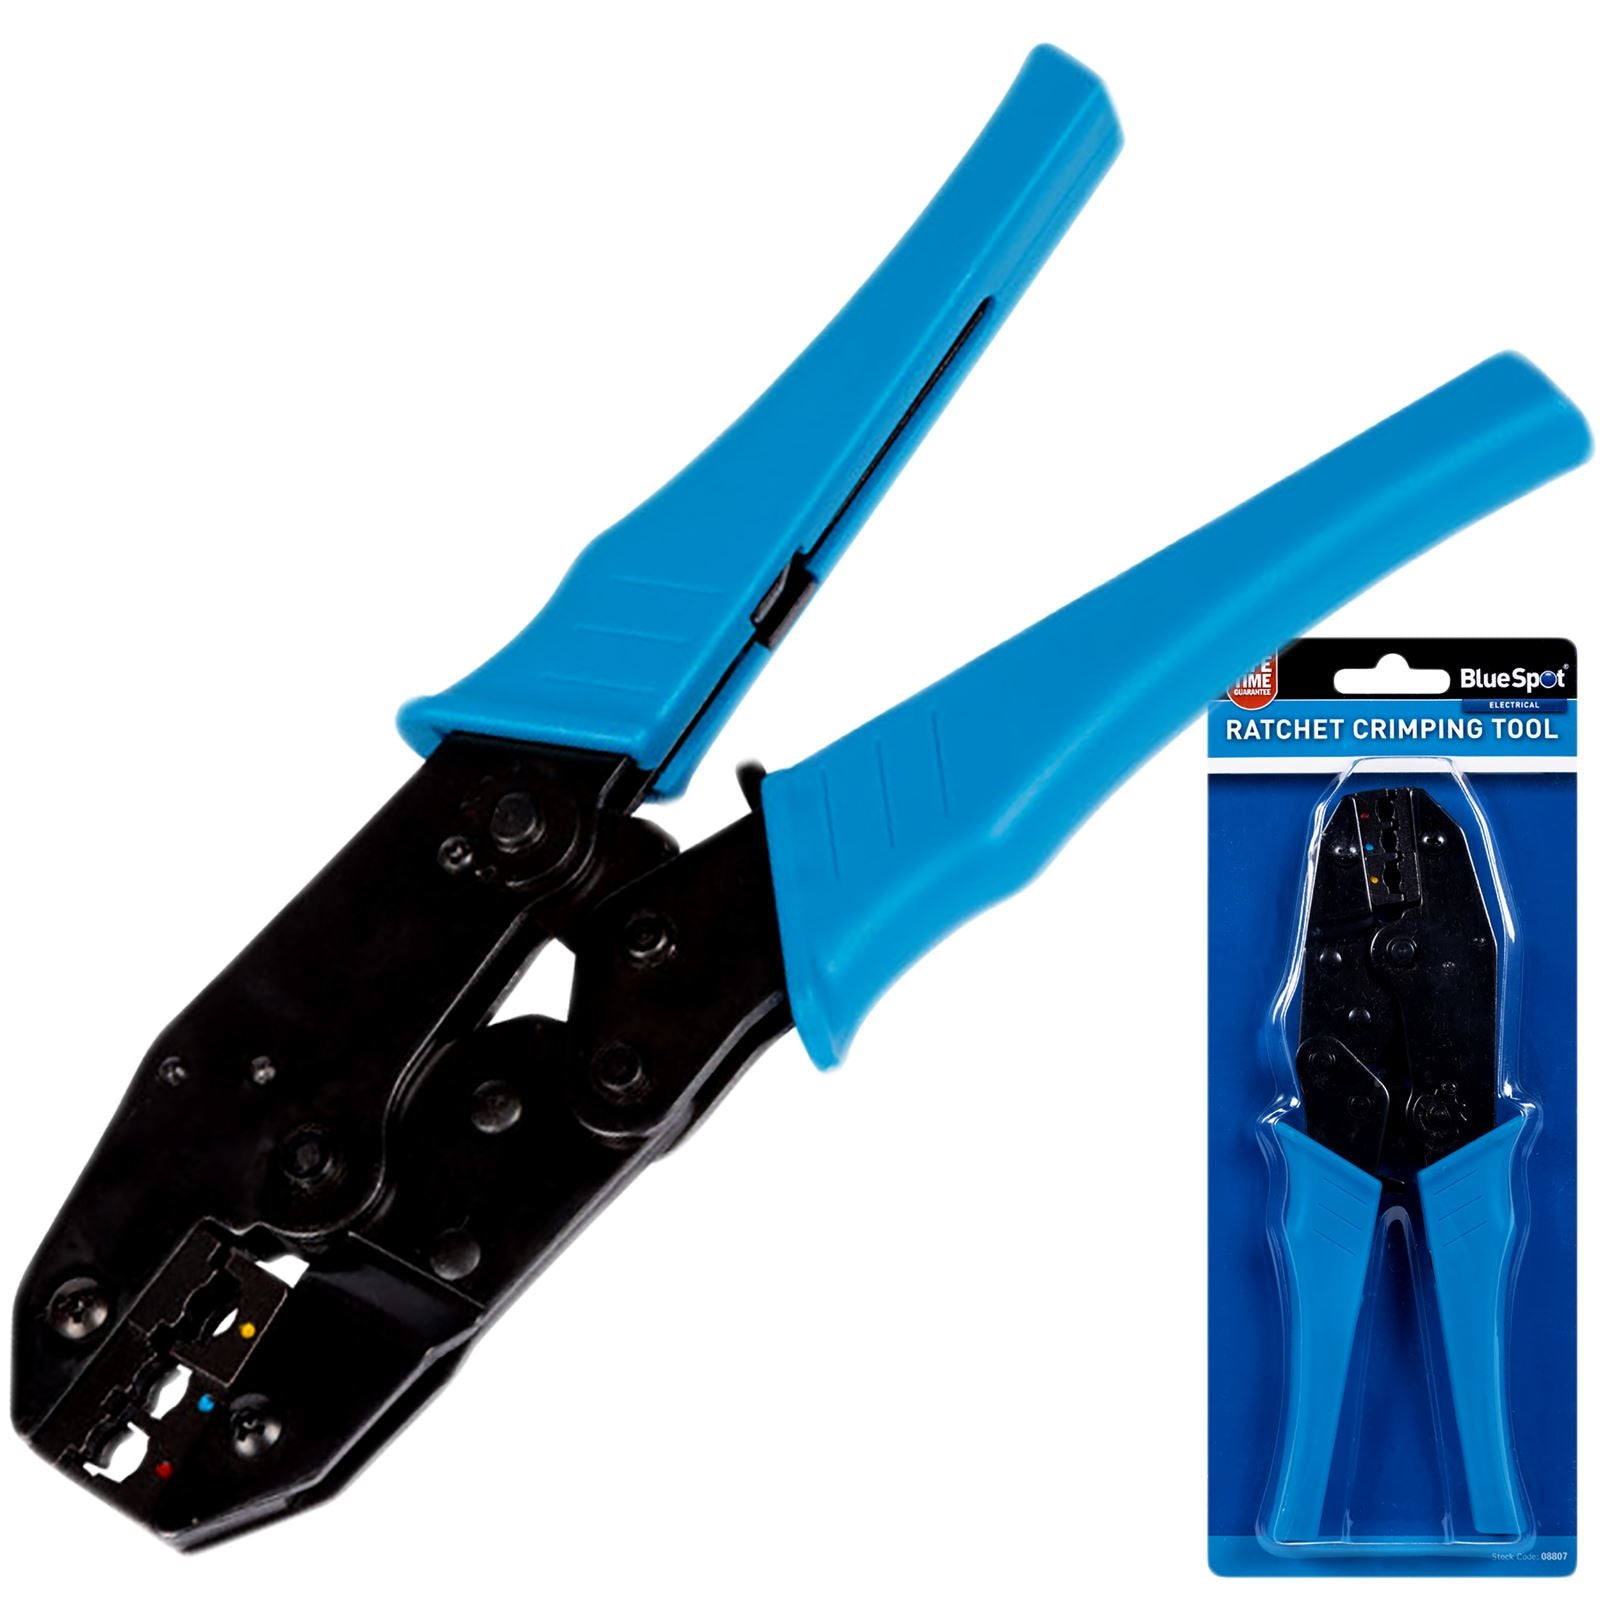 BlueSpot Ratchet Crimping Tool for Insulated Electrical Terminals